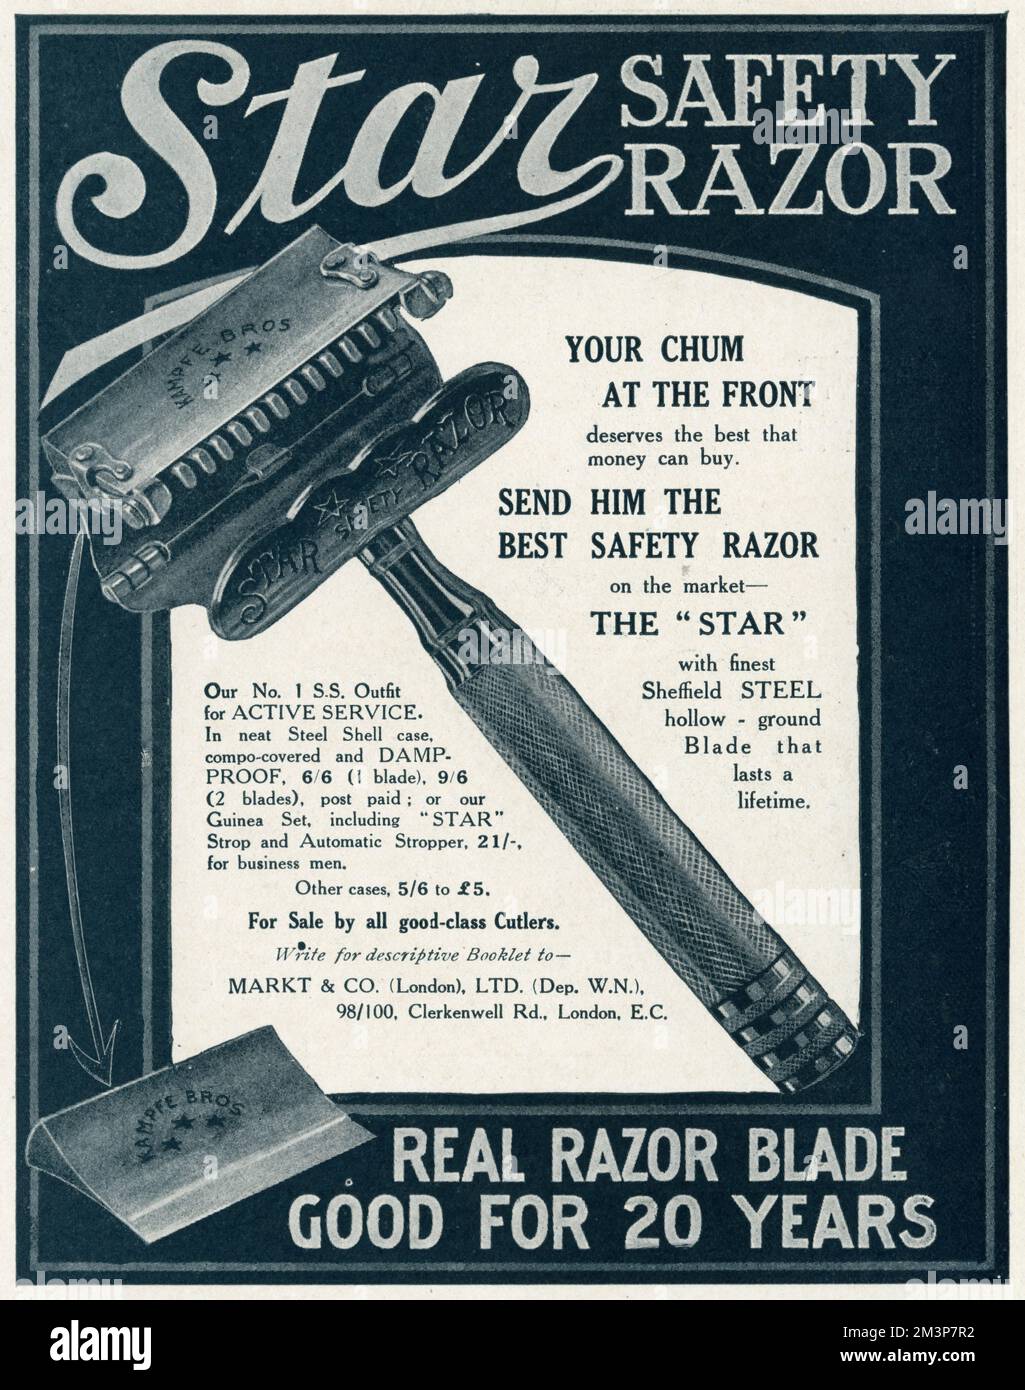 'Star' safety razor, your chum at the front deserves the best that money can buy'.  With finest sheffield steel hollow- ground blade that lasts a lifetime.  1915 Stock Photo